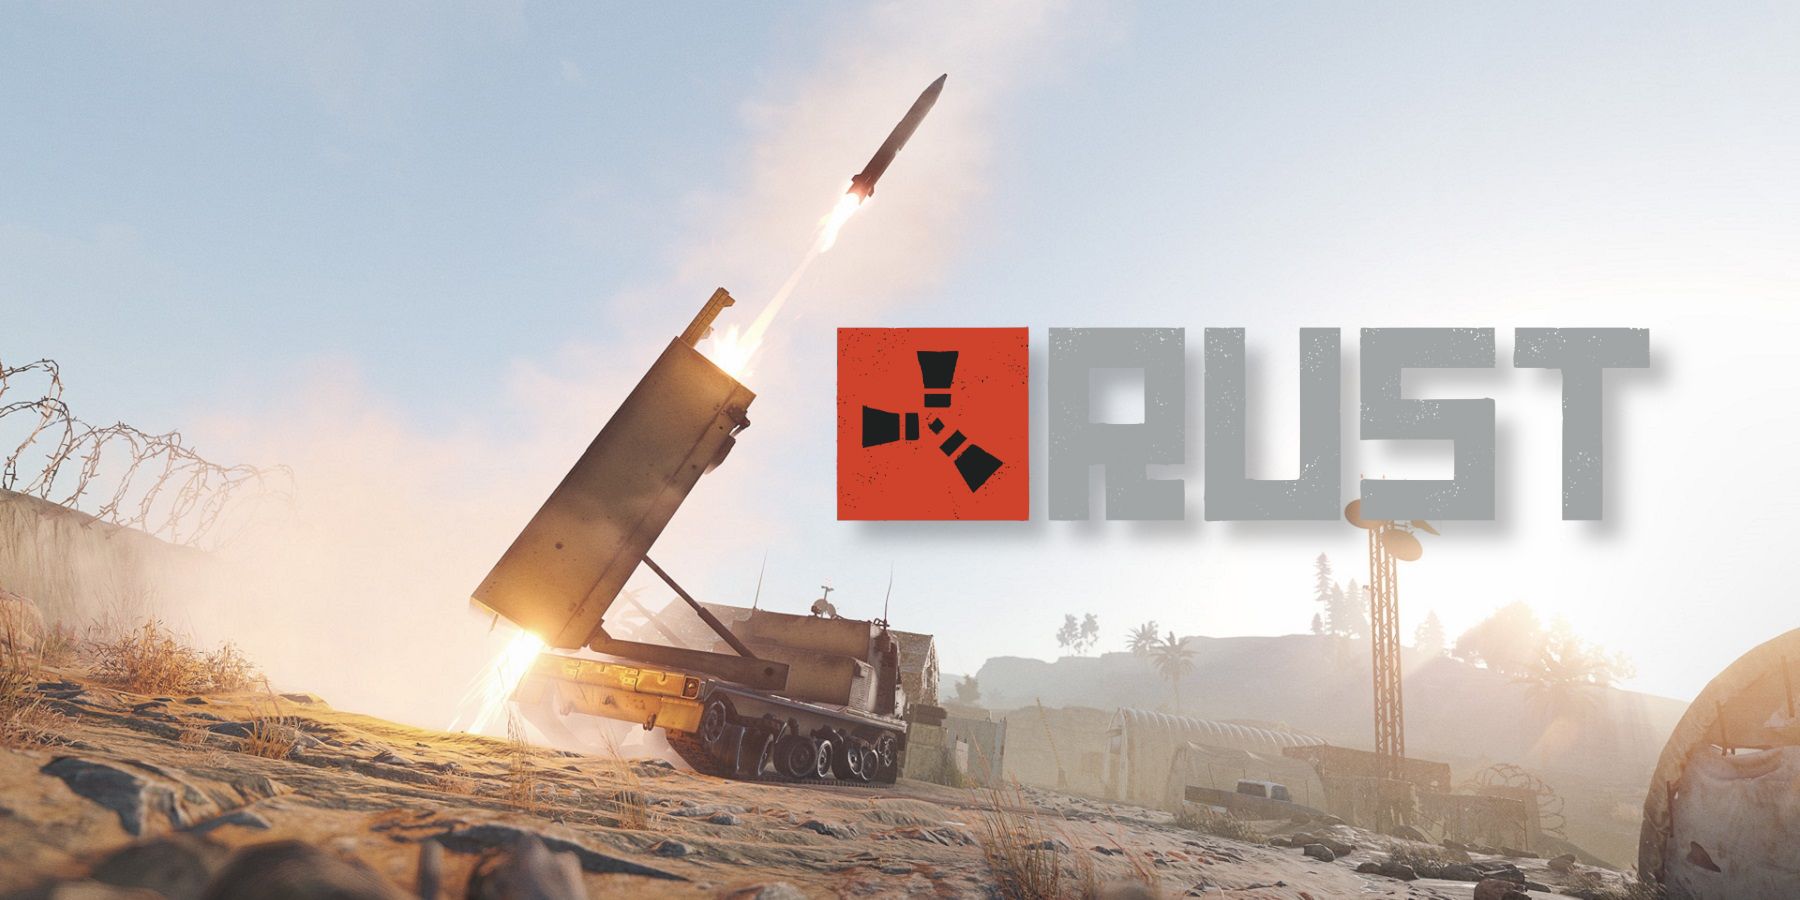 An image of a missile launcher next to the Rust logo.